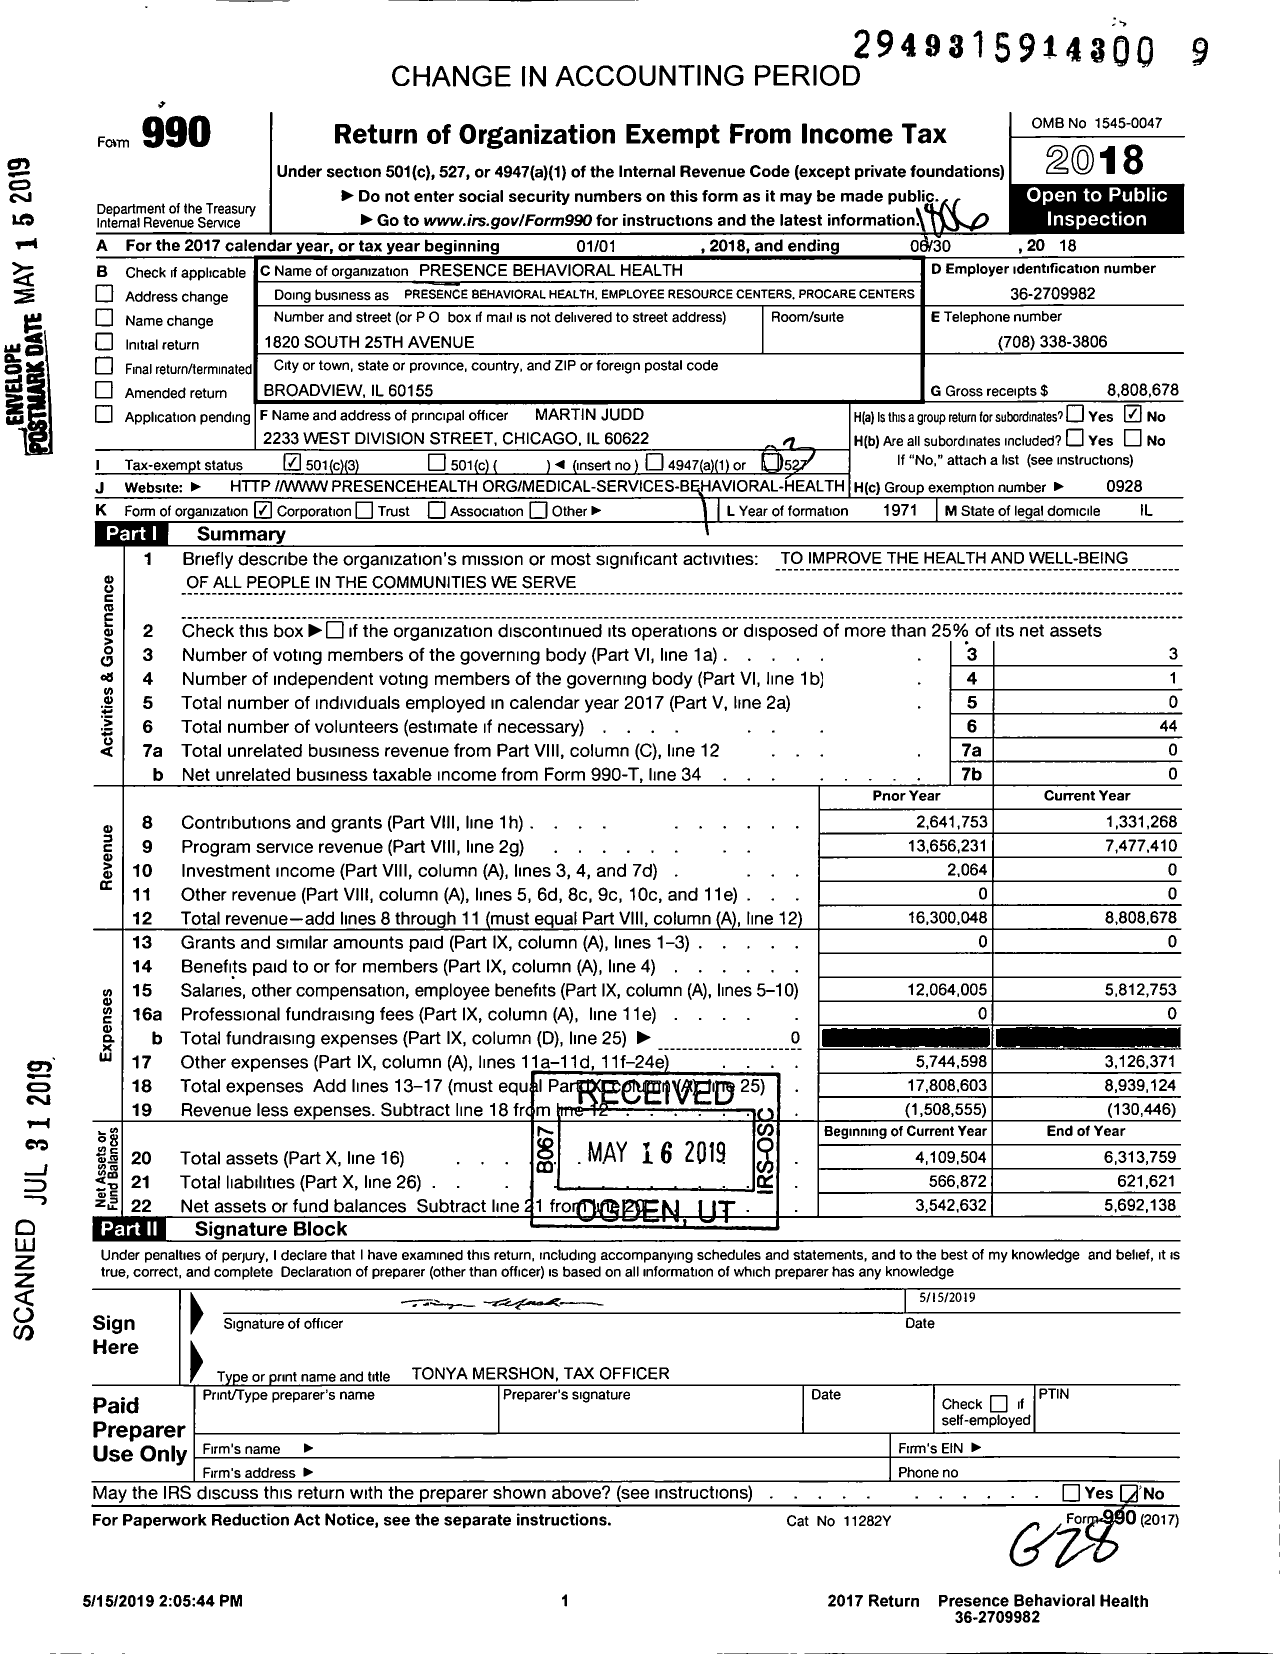 Image of first page of 2017 Form 990 for Employee Resource Centers Procare Centers